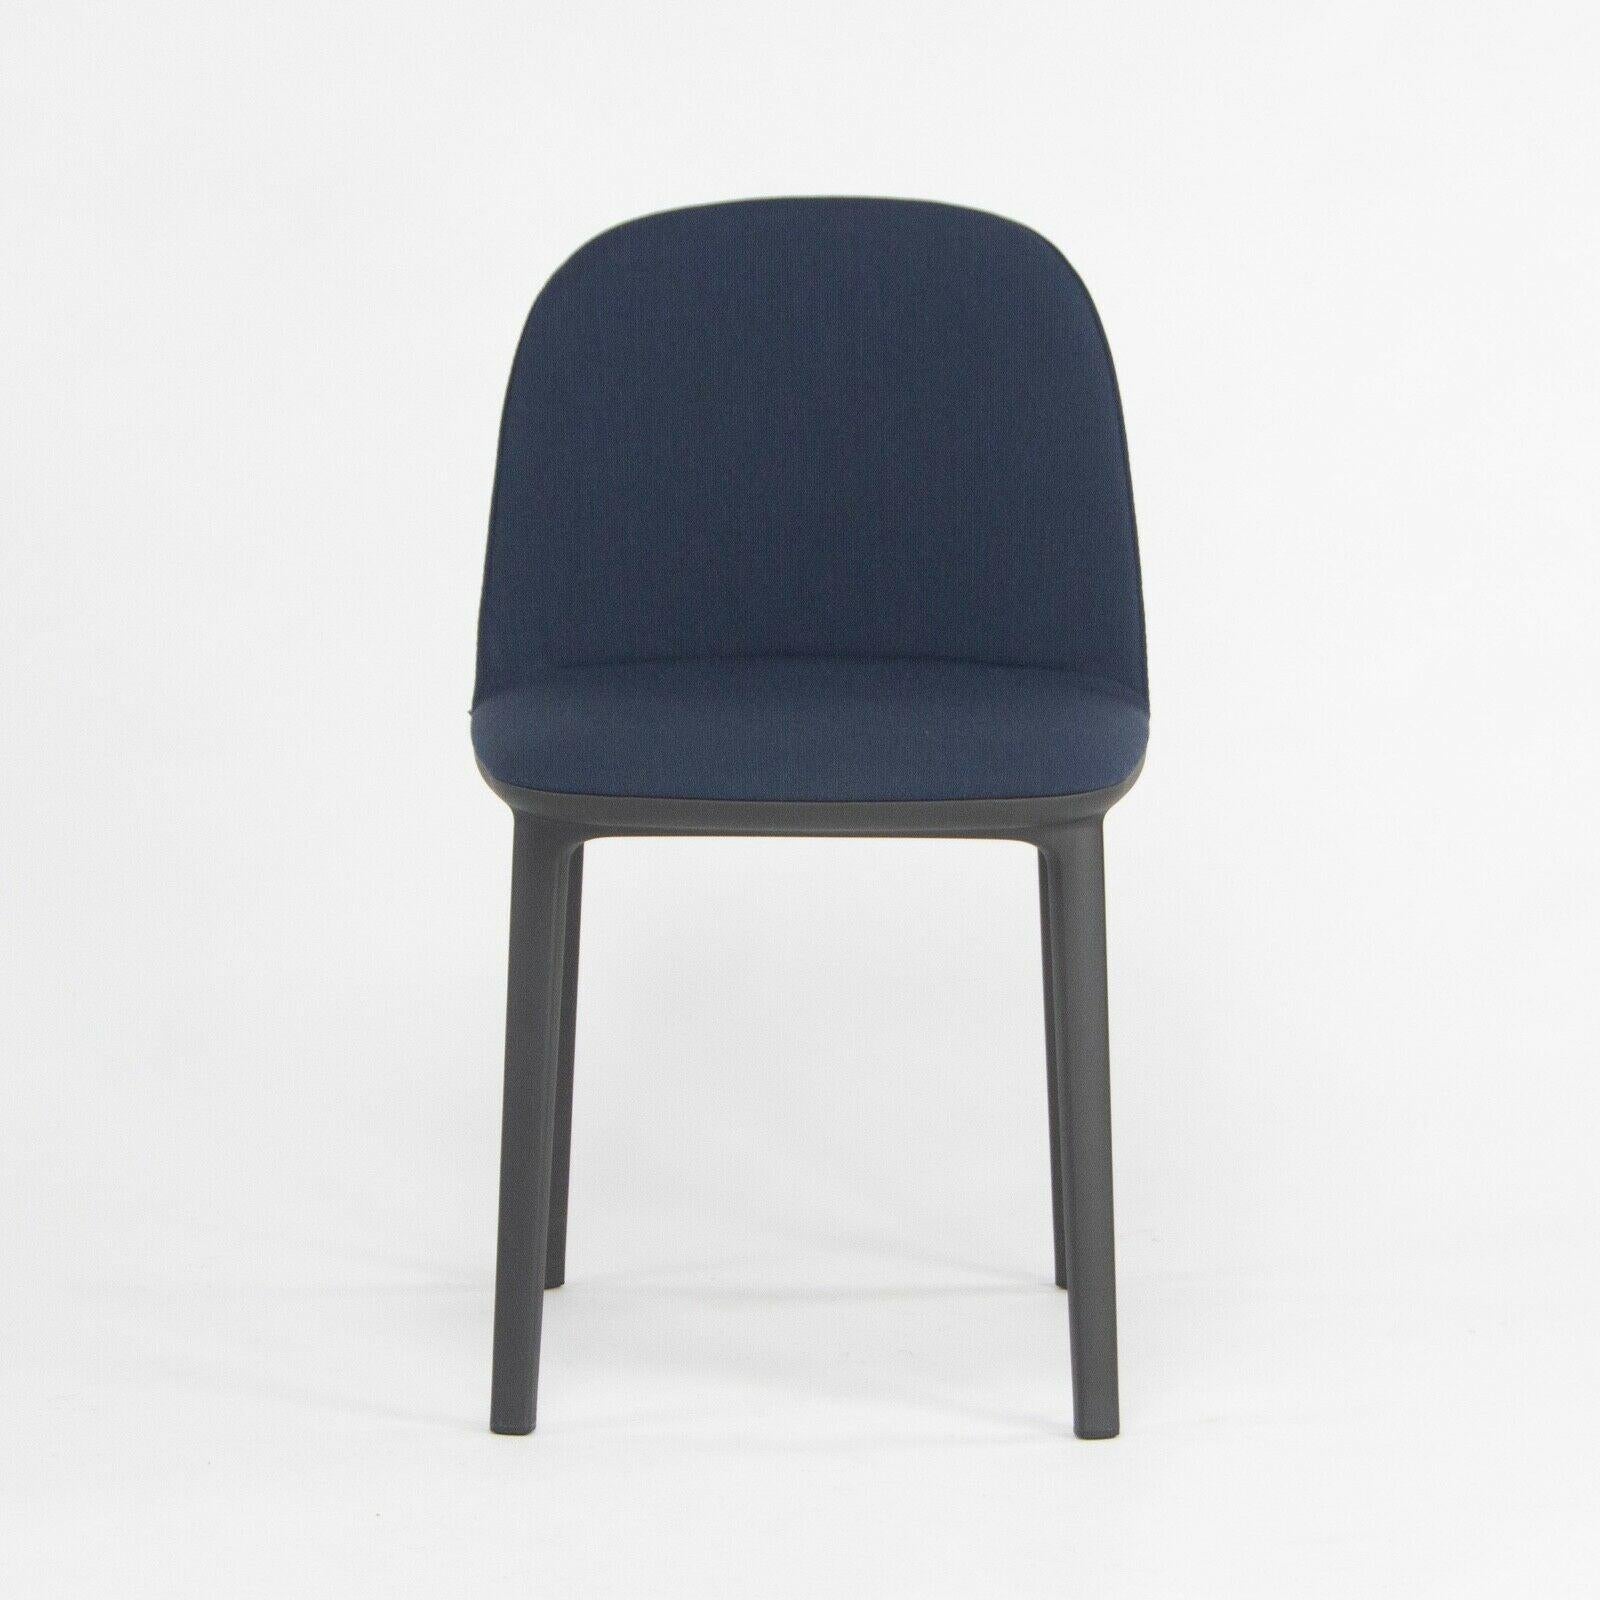 Listed for sale is Softshell Side Chair designed by Ronan and Erwan Bouroullec and produced by Vitra. This chair was constructed with a black plastic base and seat upholstered with dark (navy) blue fabric. The condition is described as 